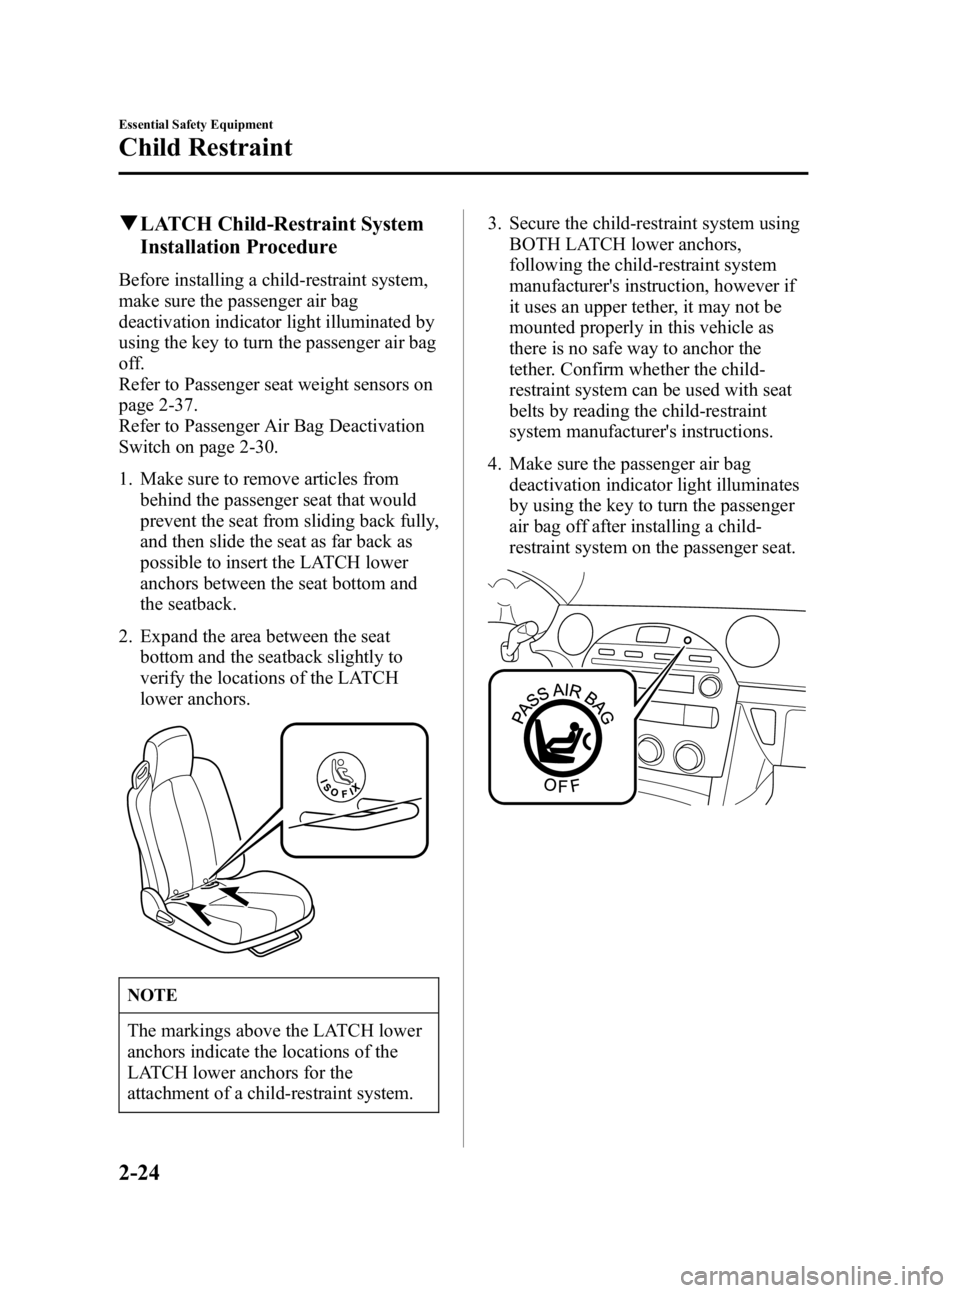 MAZDA MODEL MX-5 MIATA 2006 Owners Guide Black plate (36,1)
qLATCH Child-Restraint System
Installation Procedure
Before installing a child-restraint system,
make sure the passenger air bag
deactivation indicator light illuminated by
using th